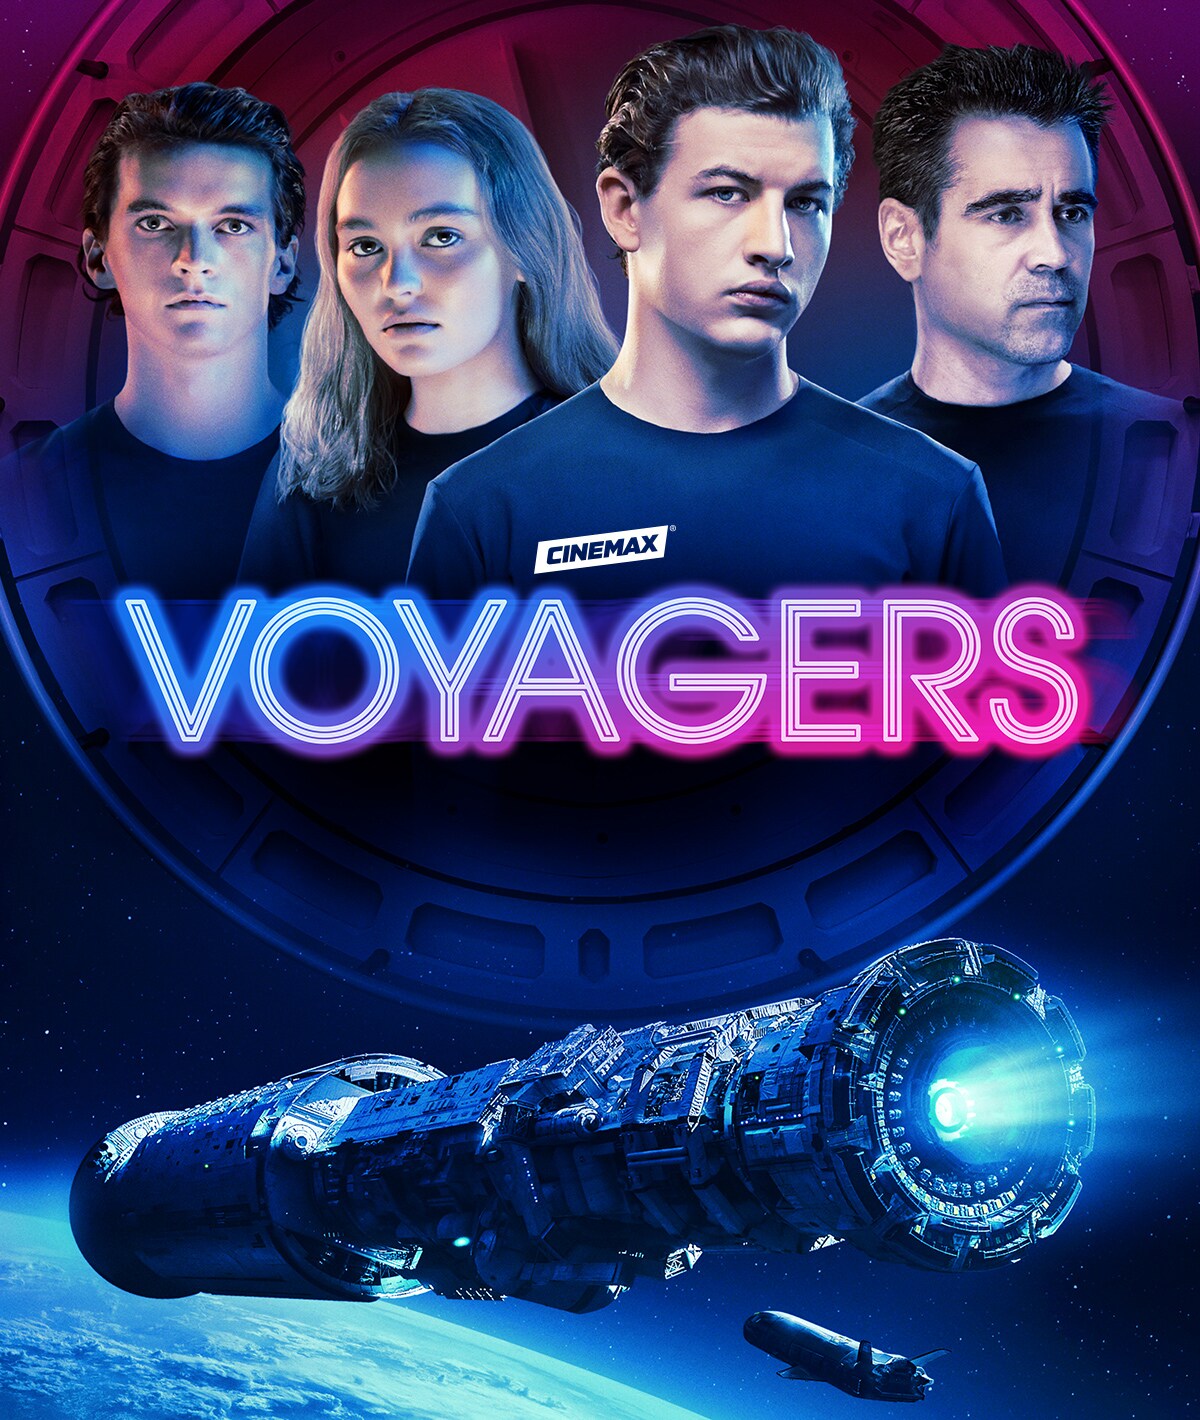 Image of Voyagers a 2021 American science fiction film on CINEMAX.